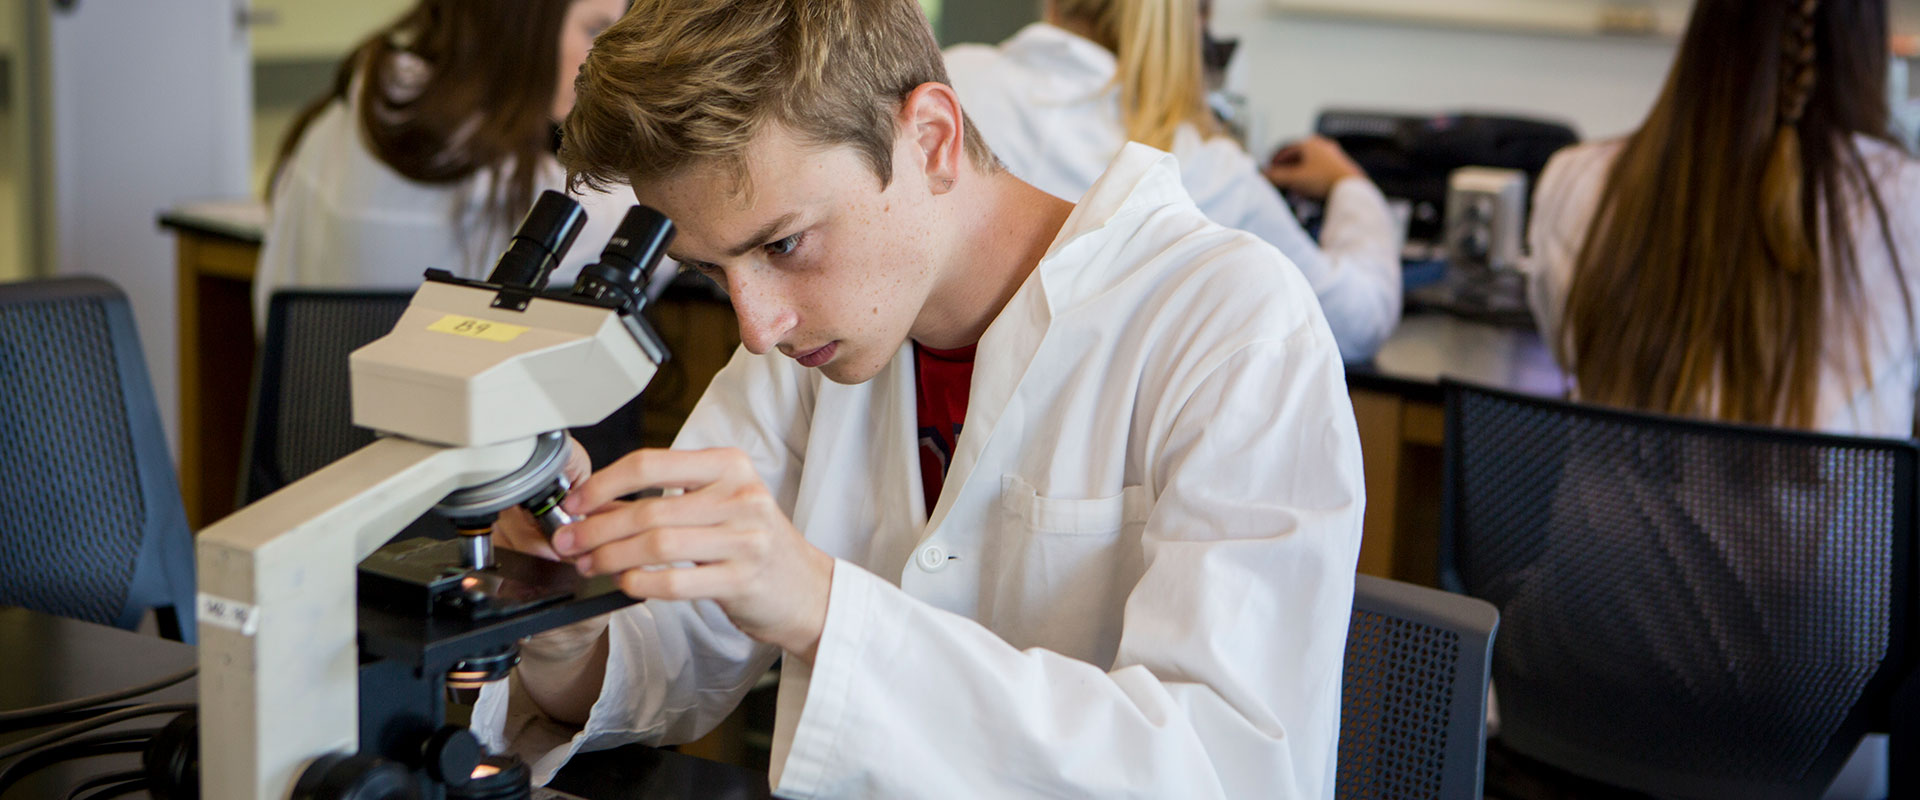 A student wearing a lab coat looking through a microscope